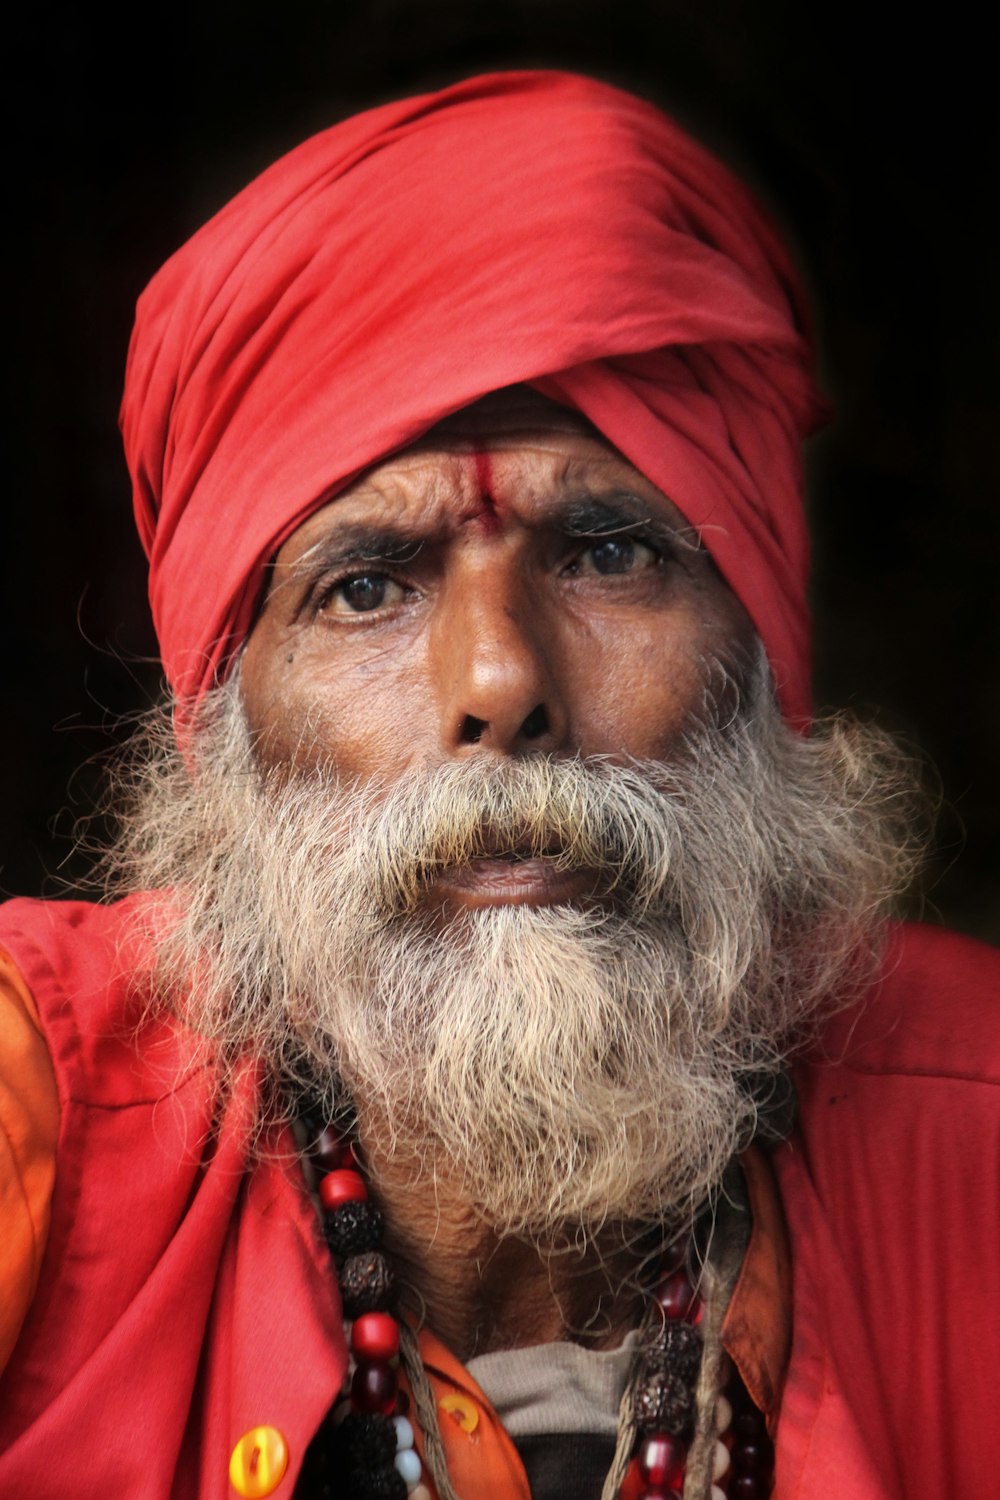 a man with a long beard wearing a red turban